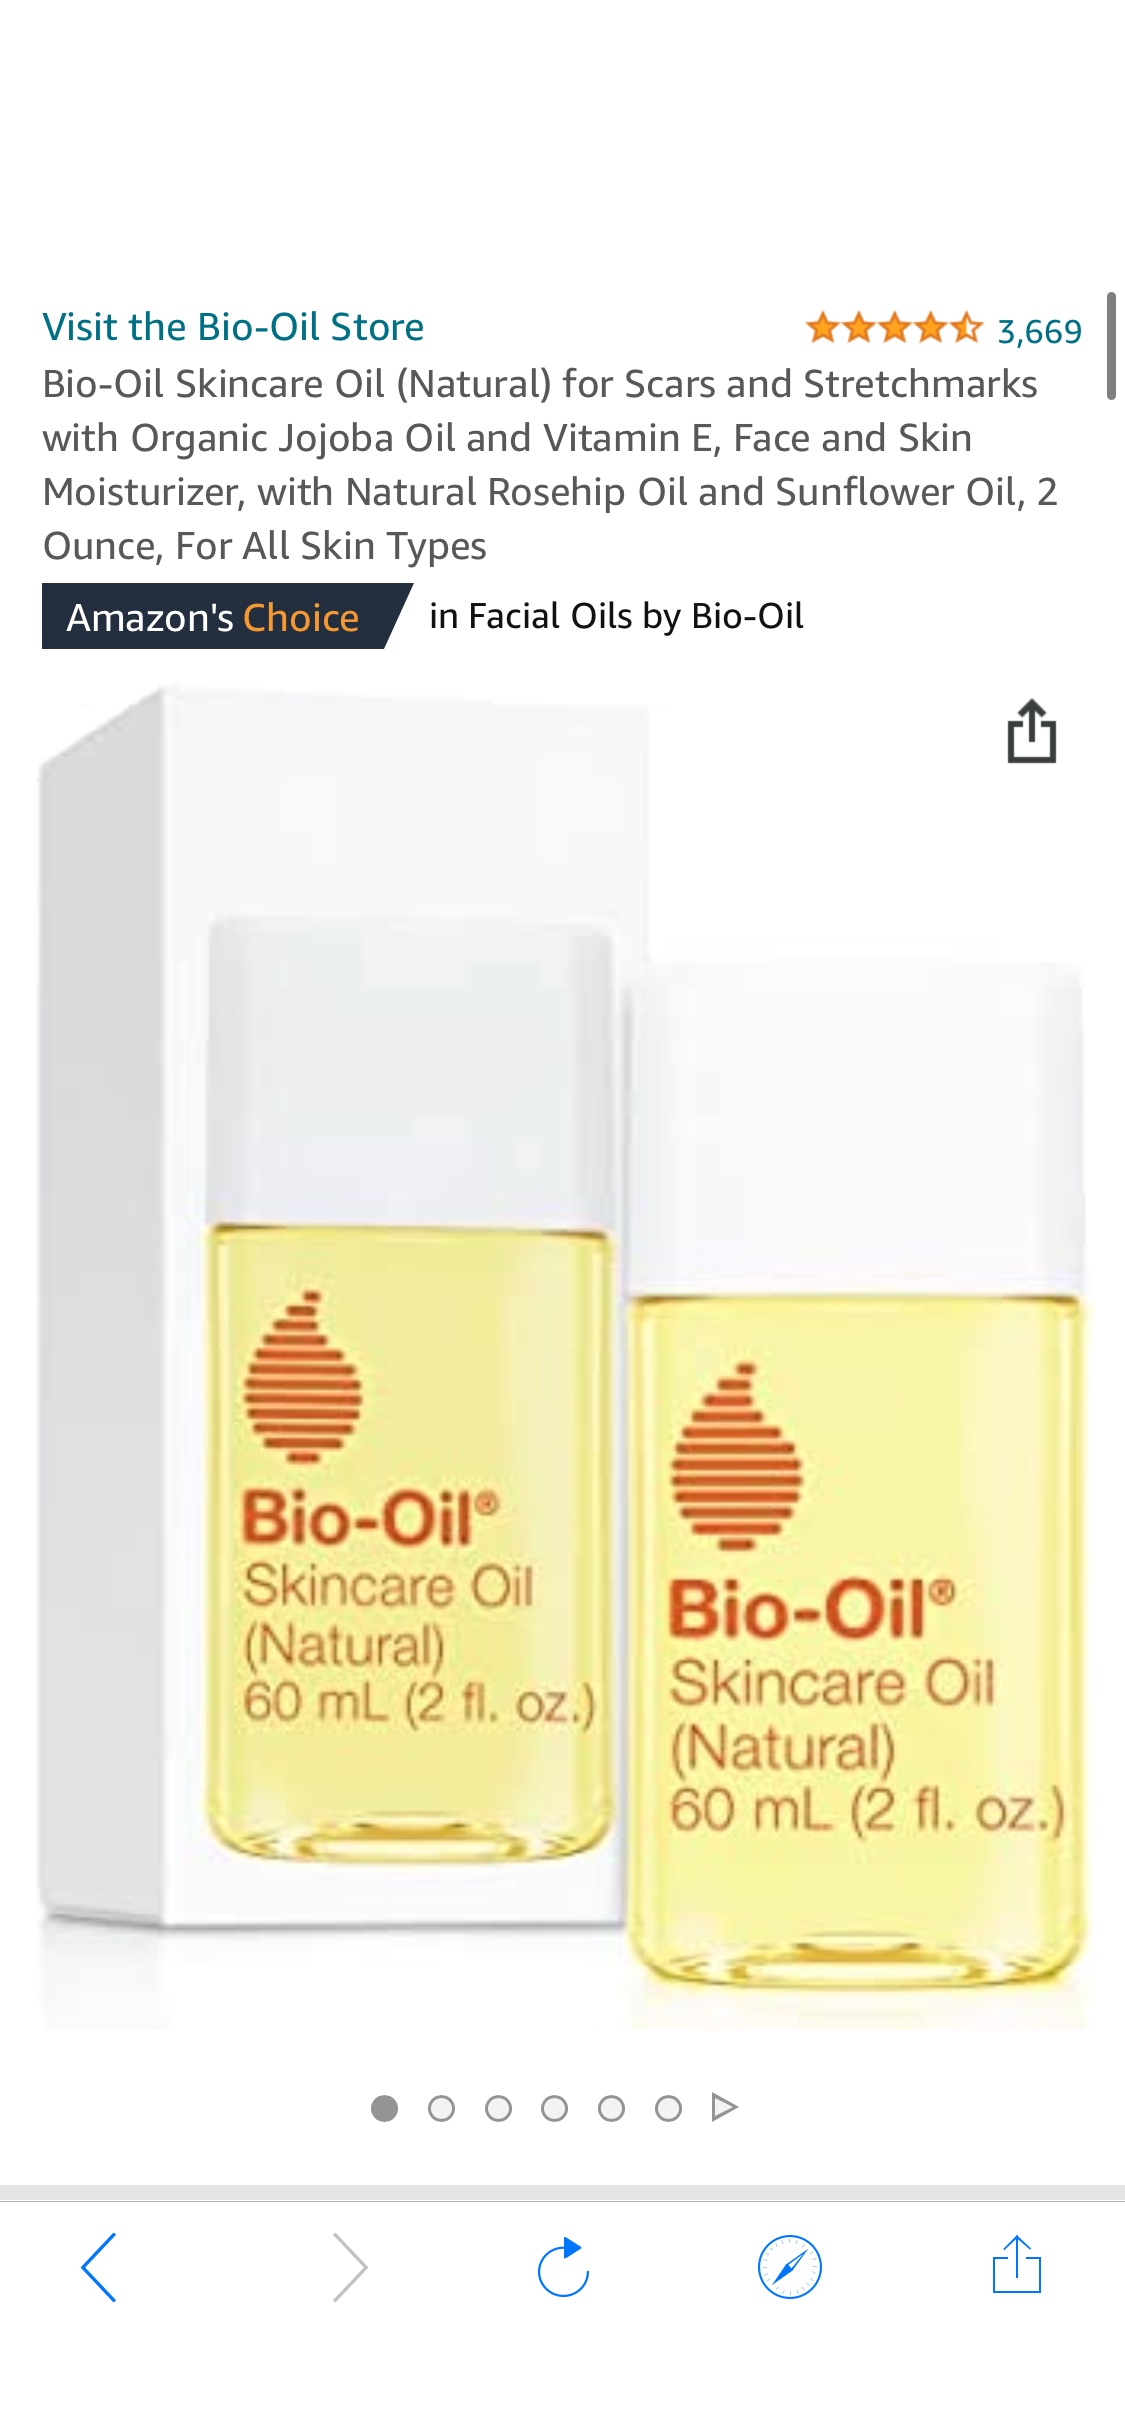 Amazon.com: Bio-Oil Skincare Oil (Natural) for Scars and Stretchmarks with Organic Jojoba Oil and Vitamin E, Face and Skin Moisturizer, with Natural Rosehip Oil and Sunflower Oil, 2 Ounce面油